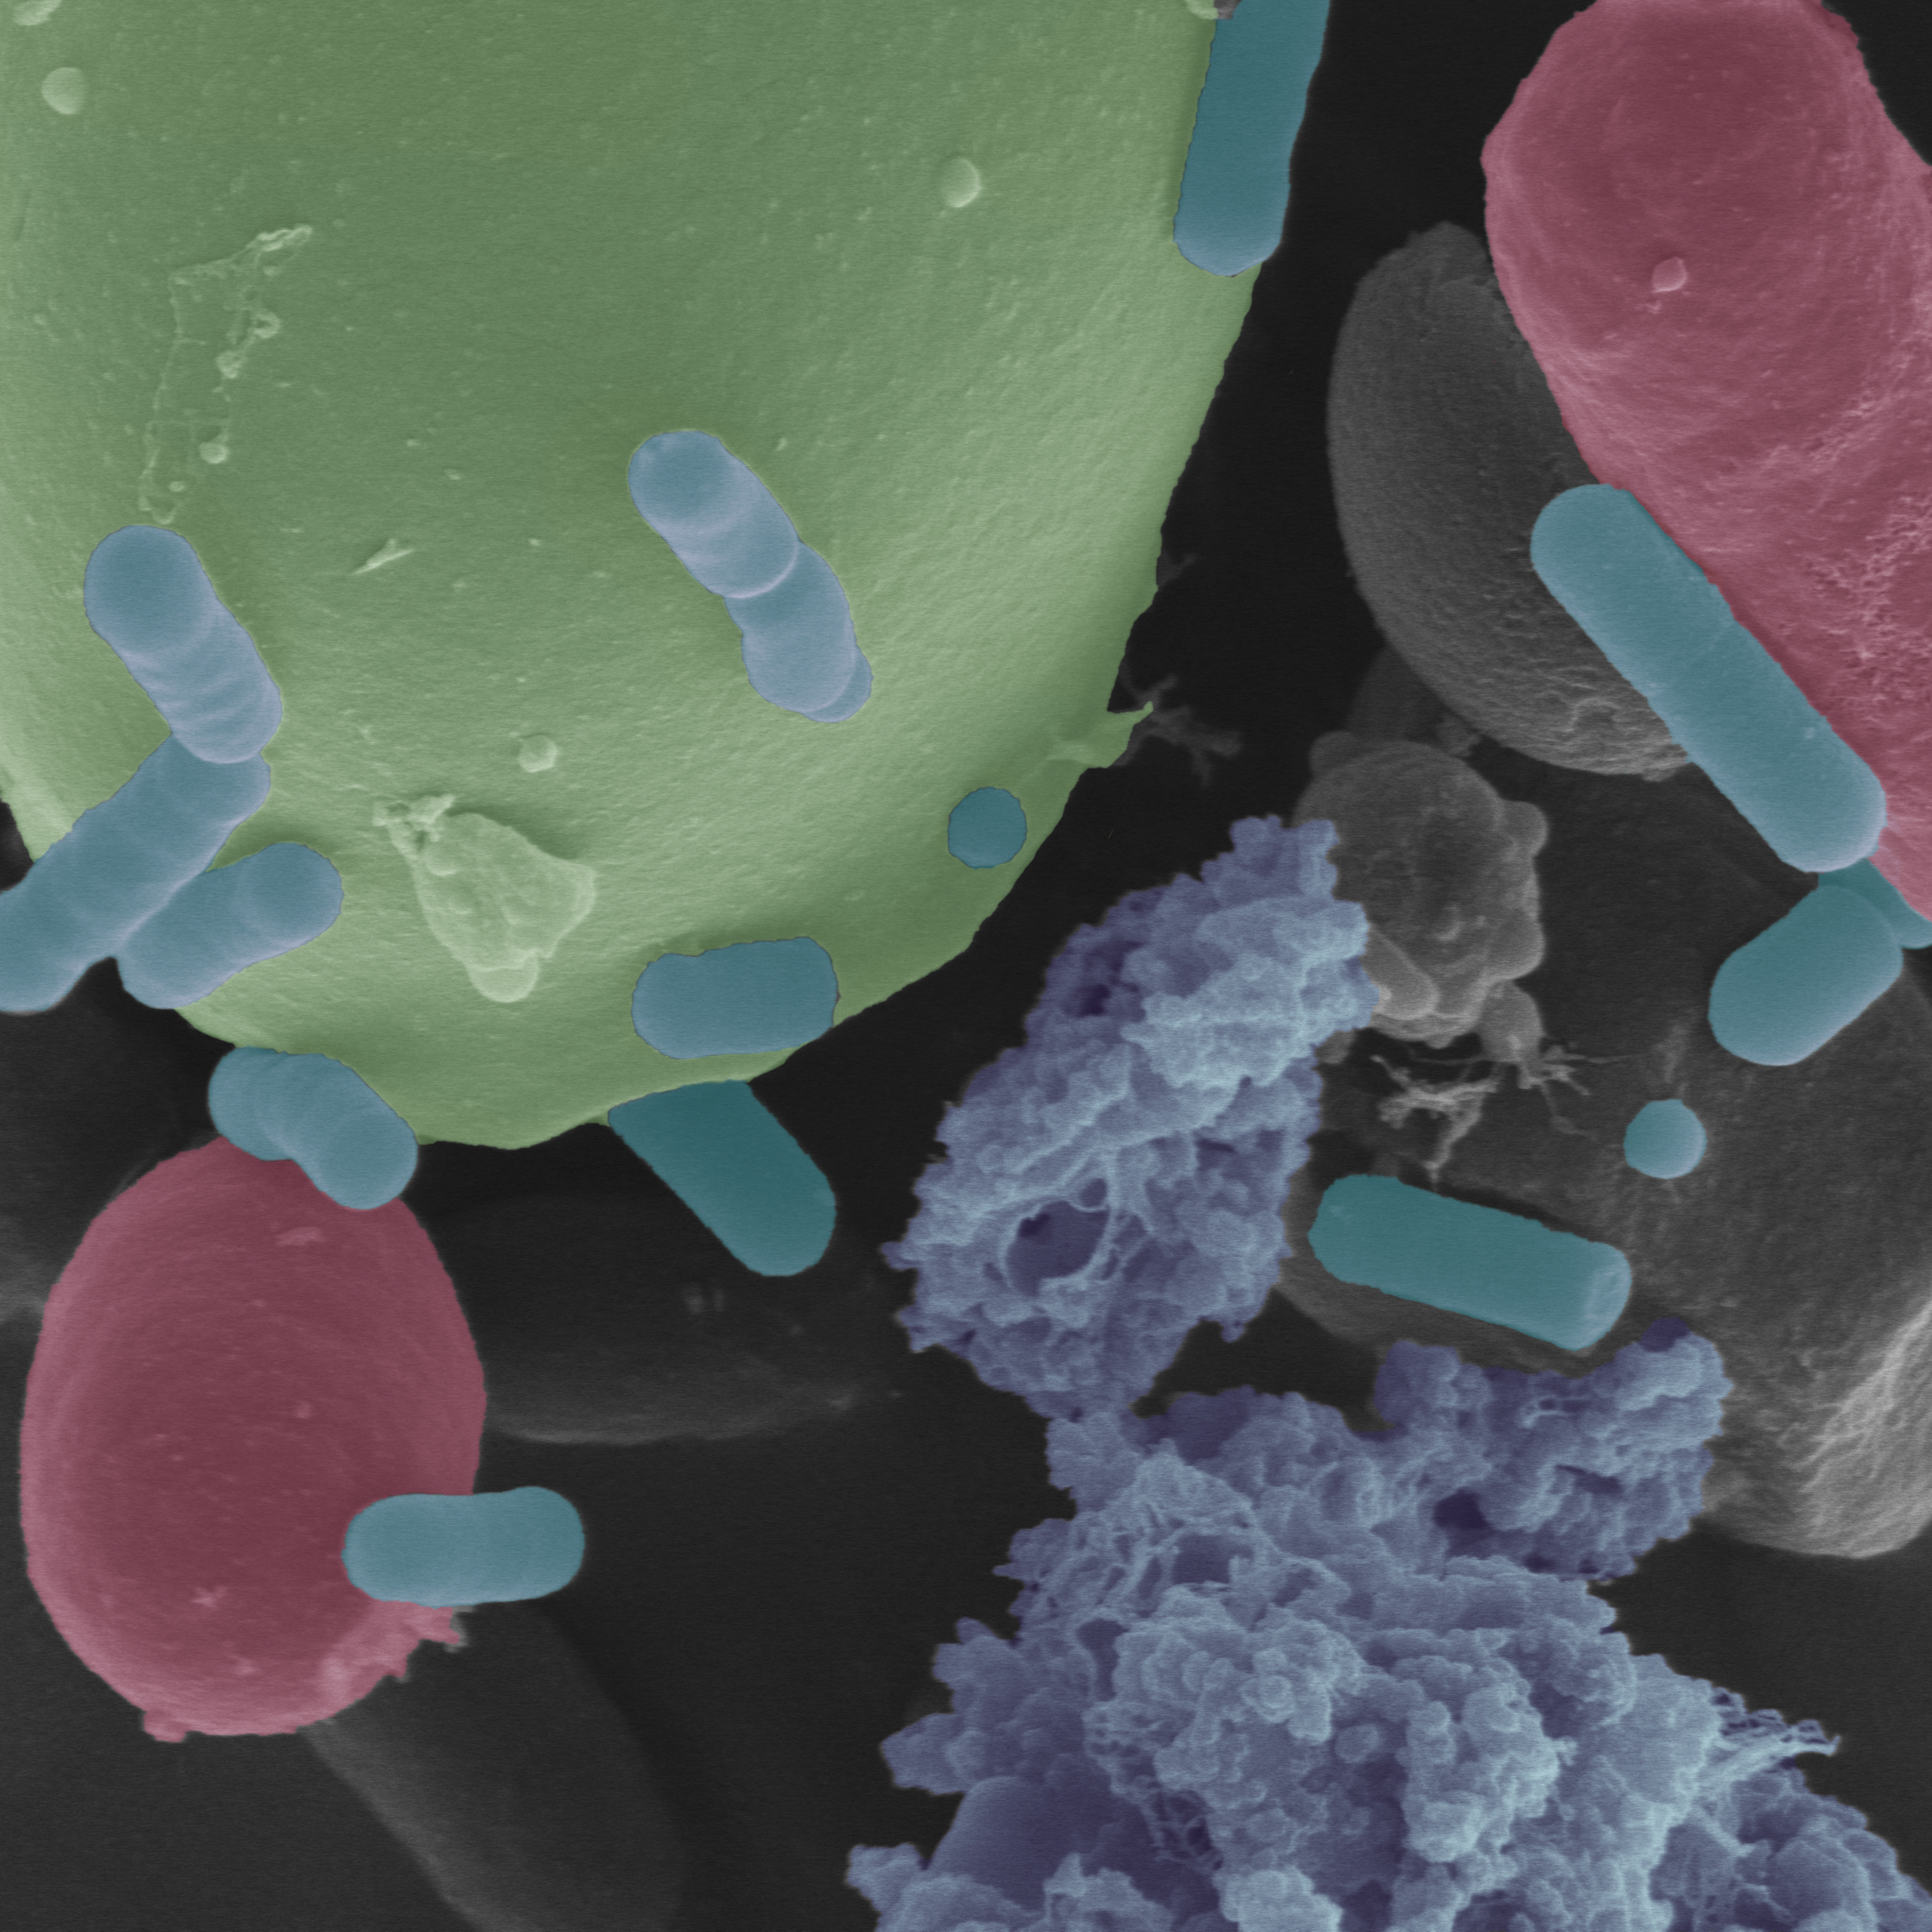 Microscopy image of rod-shaped bacteria, elongated and spherical yeast, and globular starch grains.